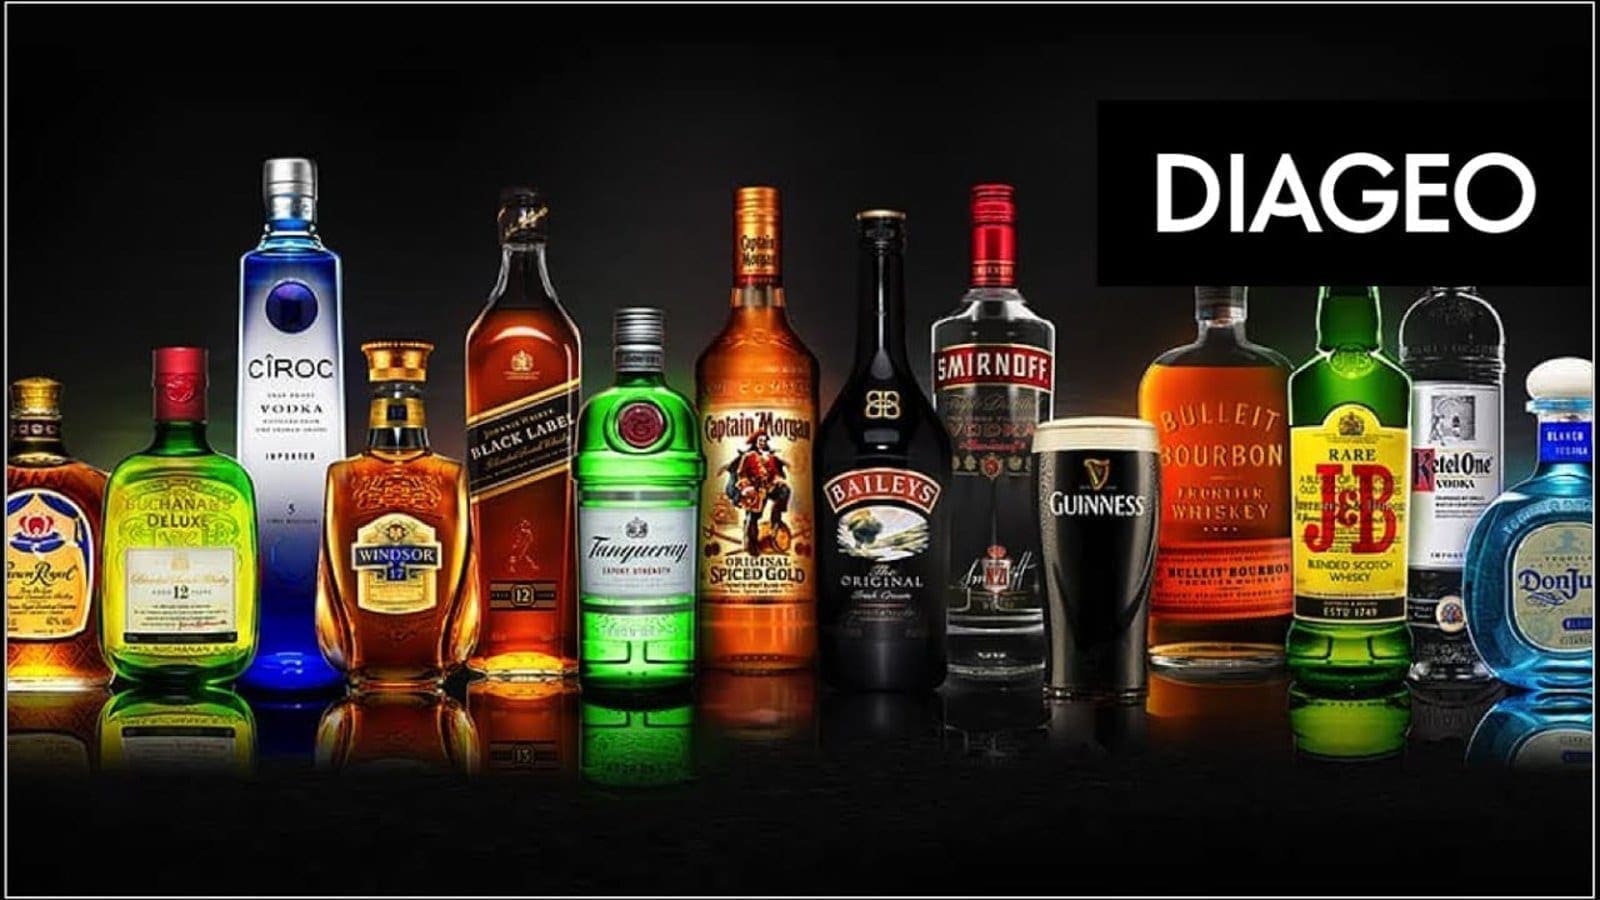 Diageo unveils ambitious sustainability plan, targets to use 100% recycled content in packaging by 2030